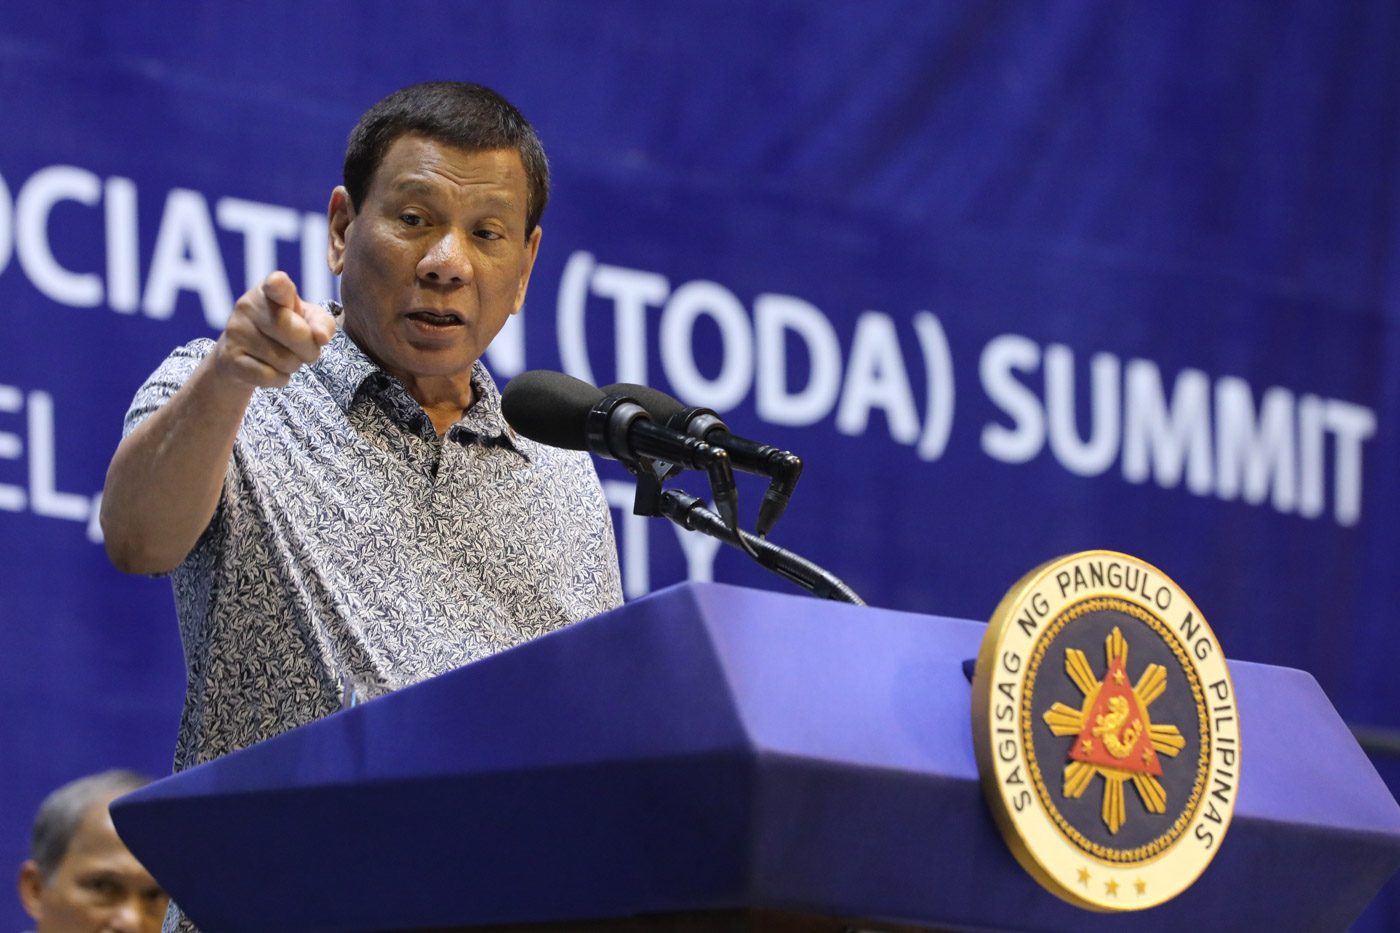 May 2019 polls a ‘referendum’ for the Duterte gov’t – analyst